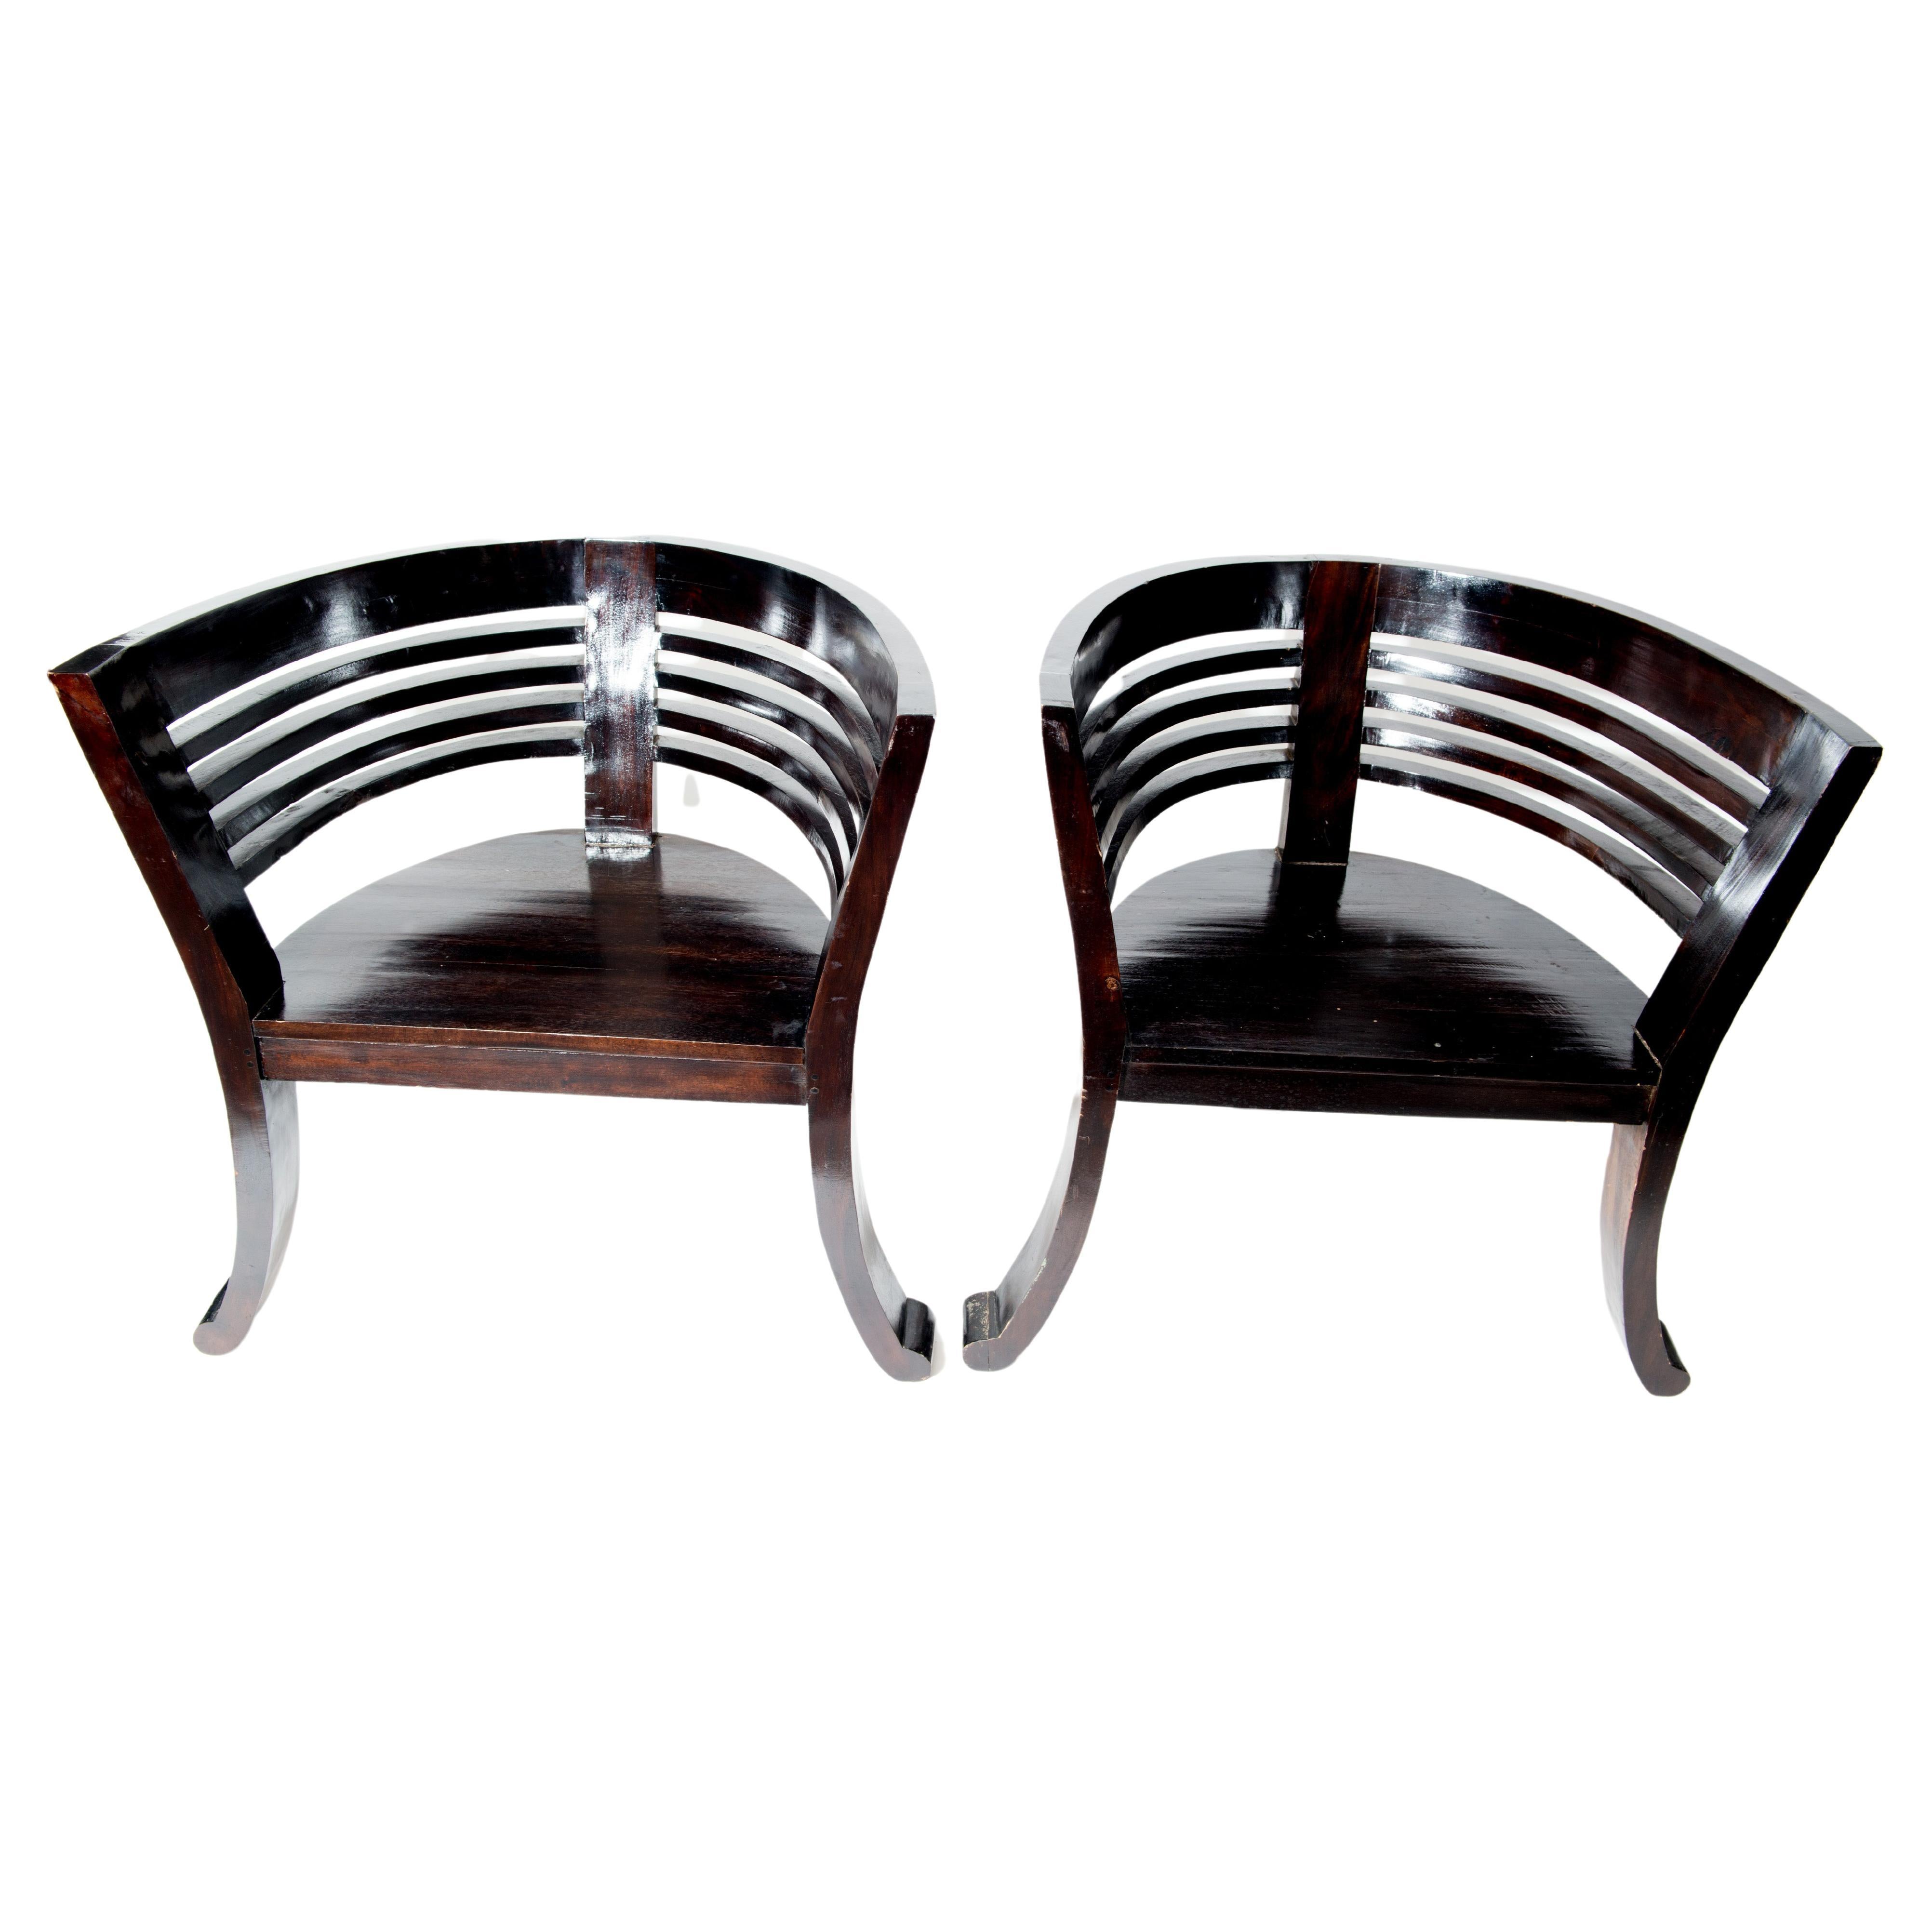 Pair of Sculptural Ebonized Wood Finish Arm Chairs